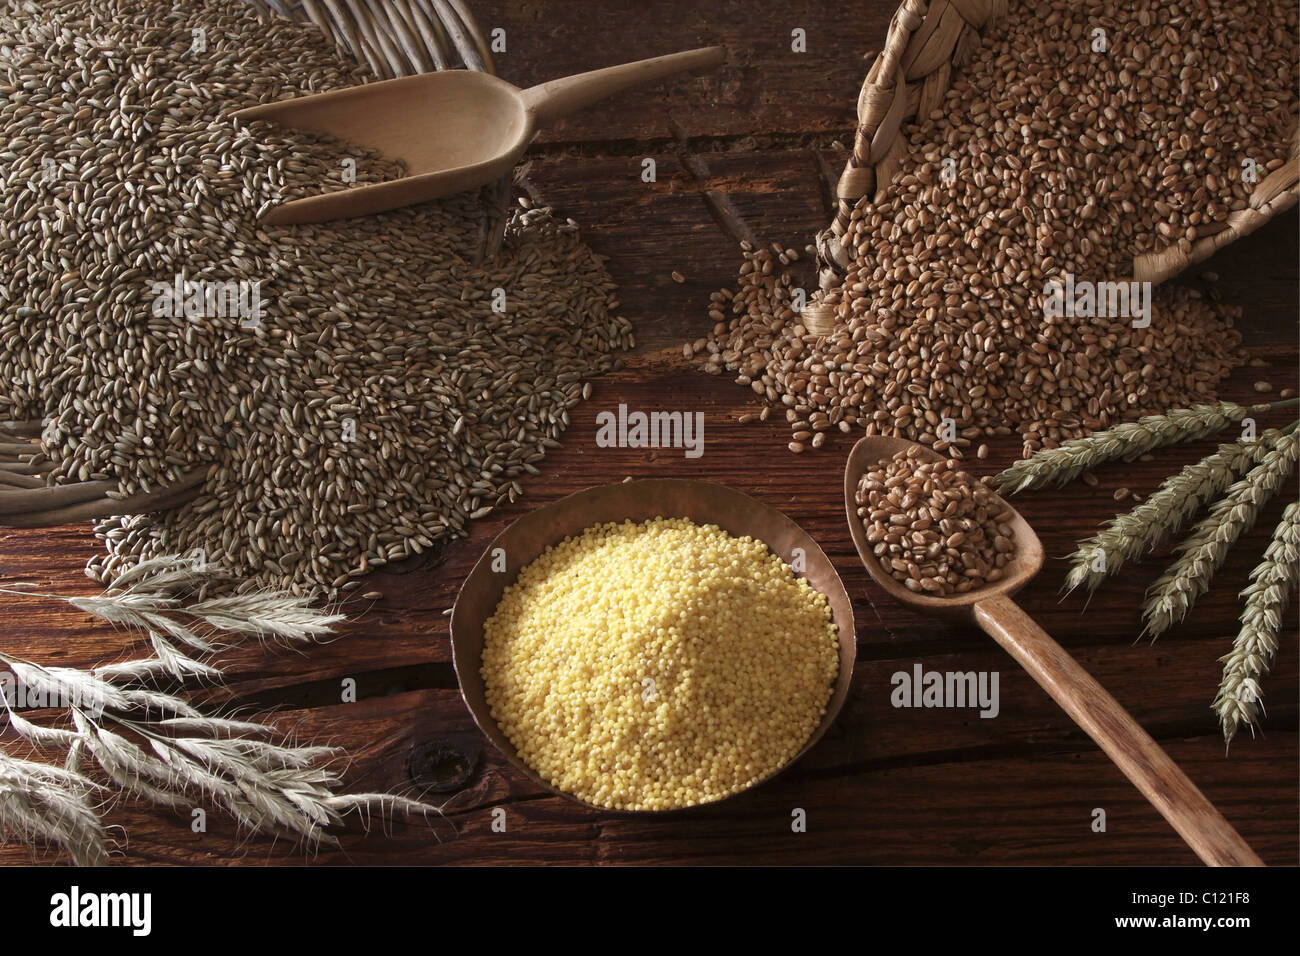 Different types of grain, Rye (Secale cereale), Wheat (Triticum) and Millet (Panicum miliaceum) on a wooden surface Stock Photo